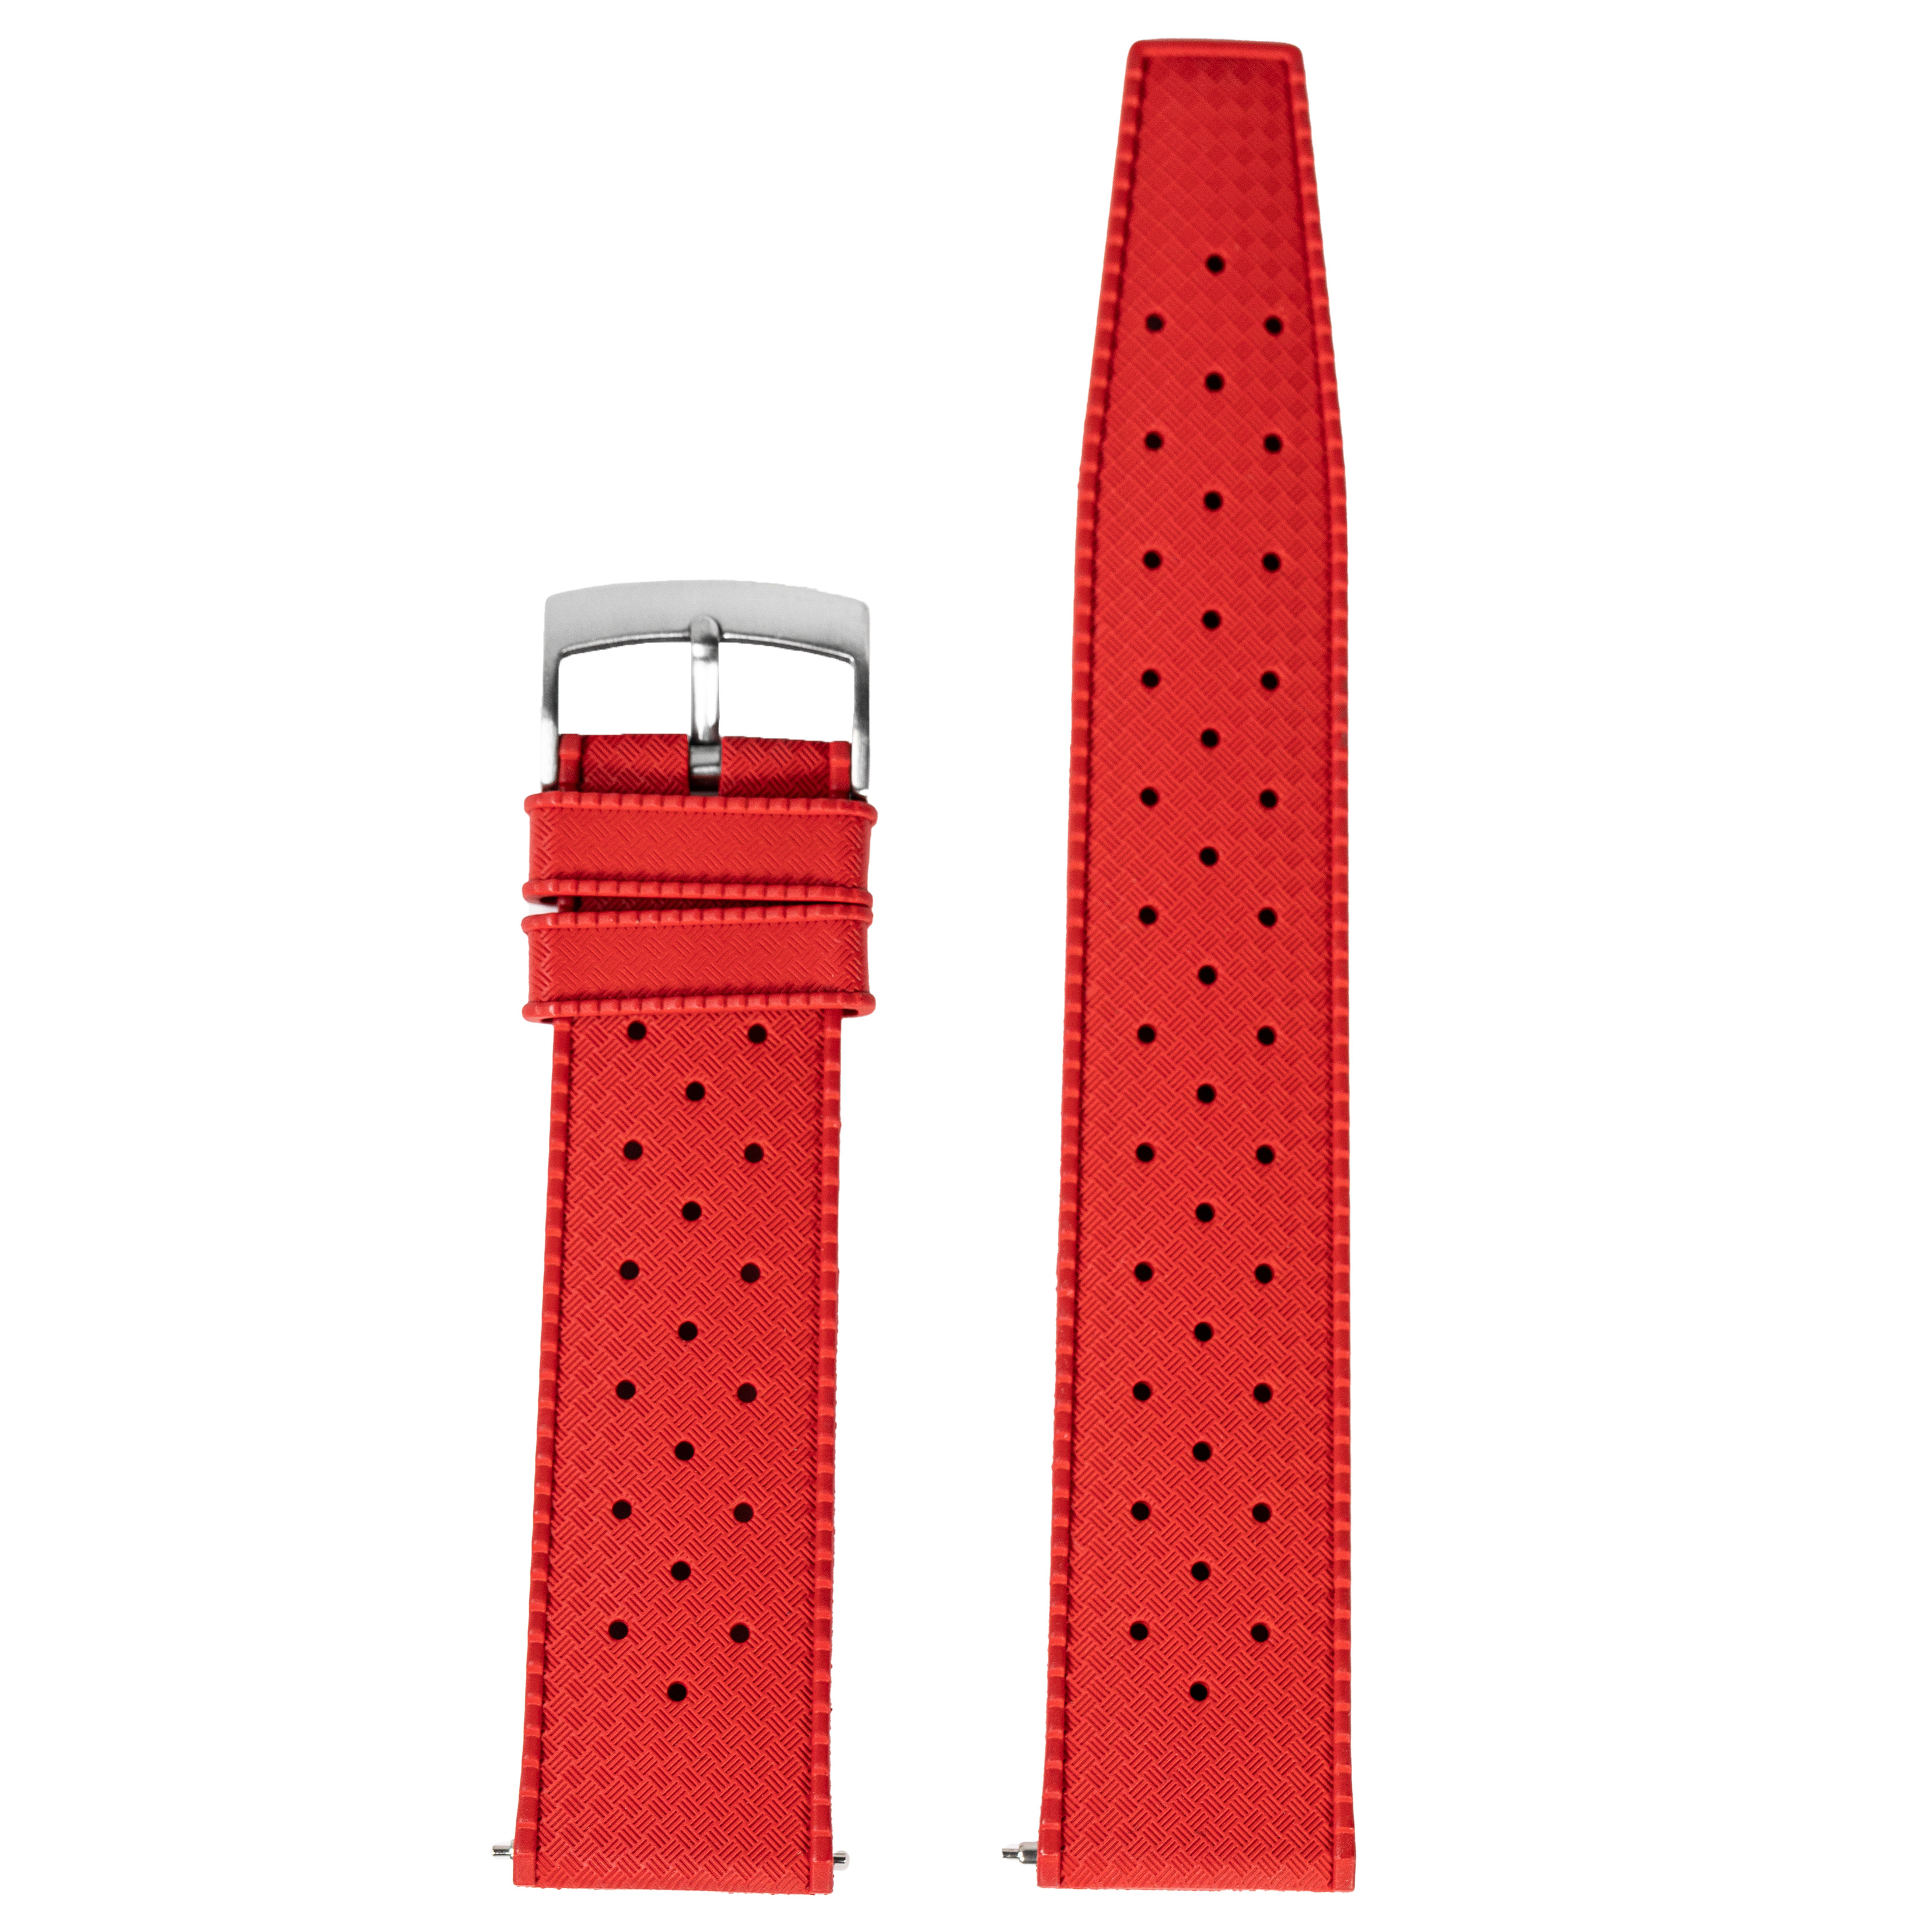 [QuickFit] King Tropic FKM Rubber - Red 26mm